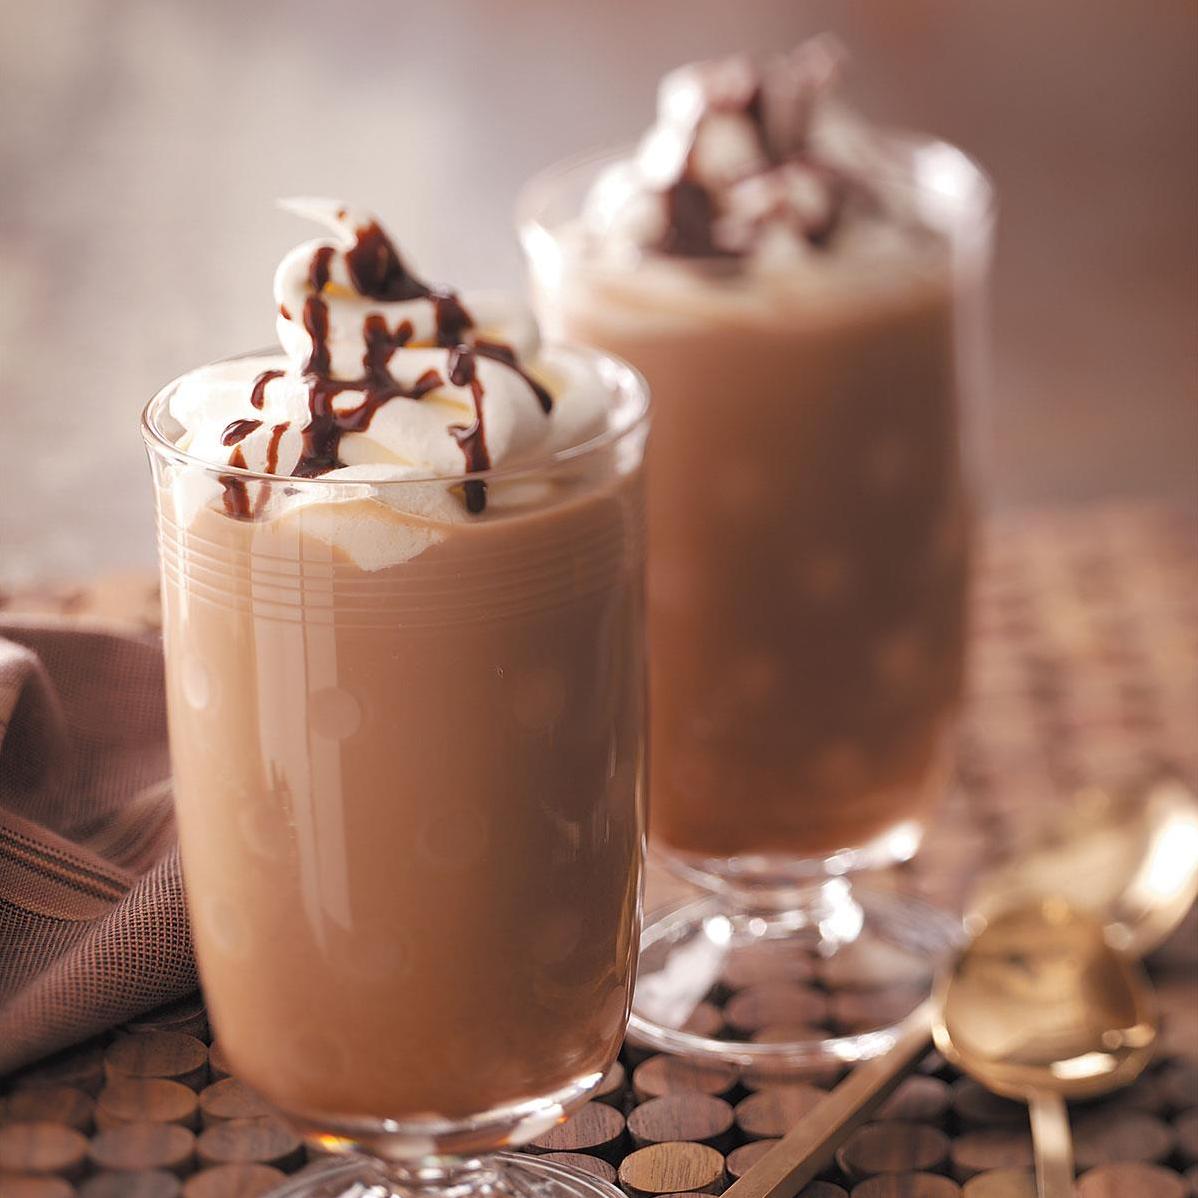  Who needs dessert when you can have a mocha frappé?